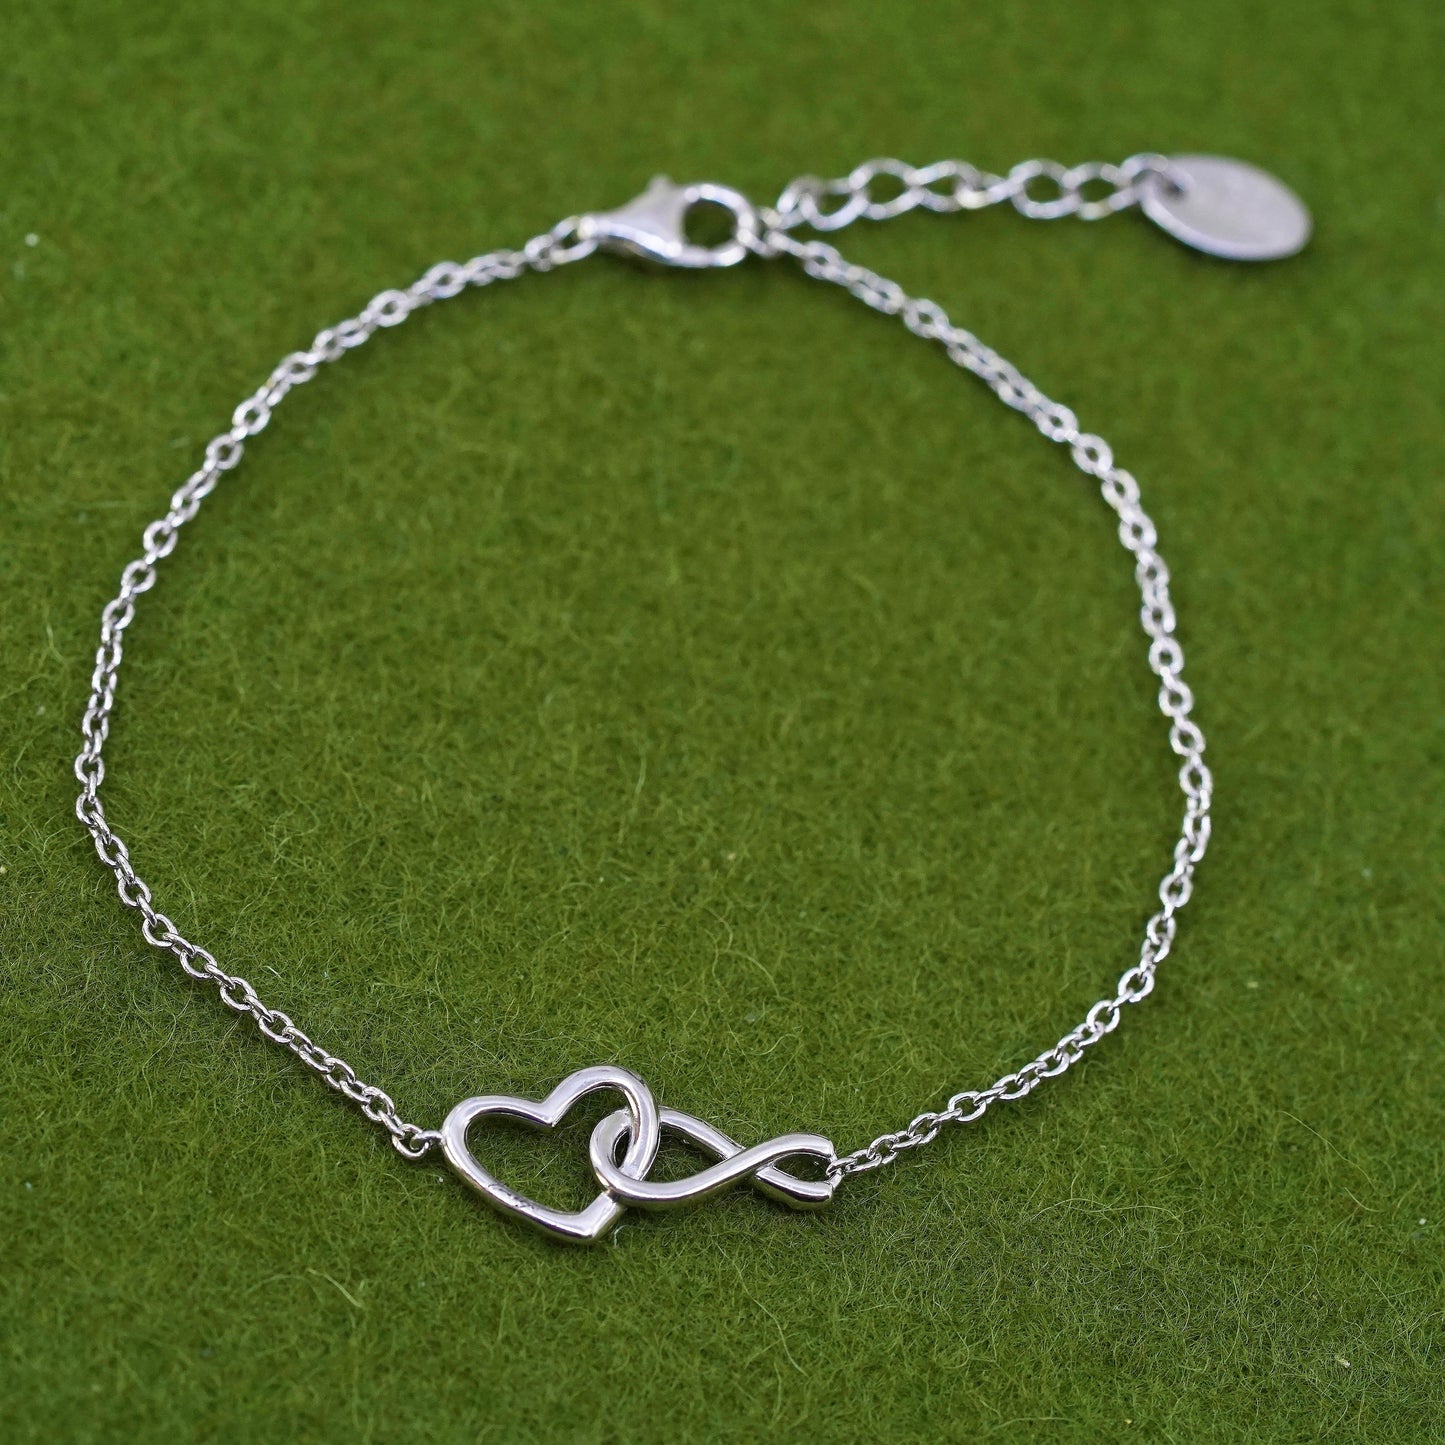 6.75+1”, Vintage sterling silver bracelet, 925 circle chain with heart charm cz